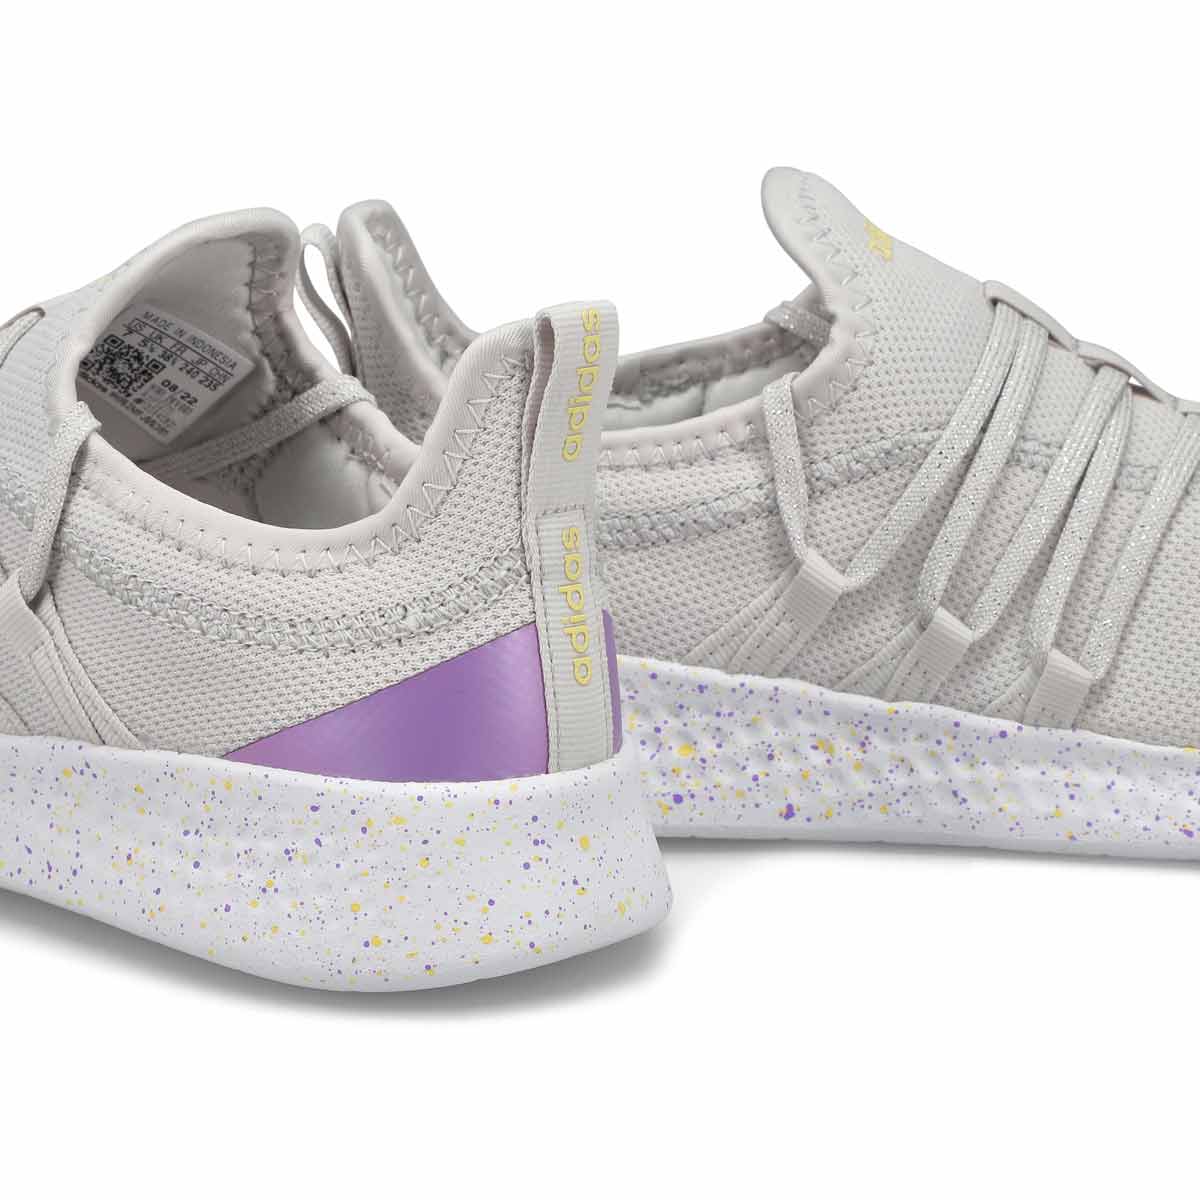 Experience Unstoppable Comfort with adidas Puremotion Adapt SPW